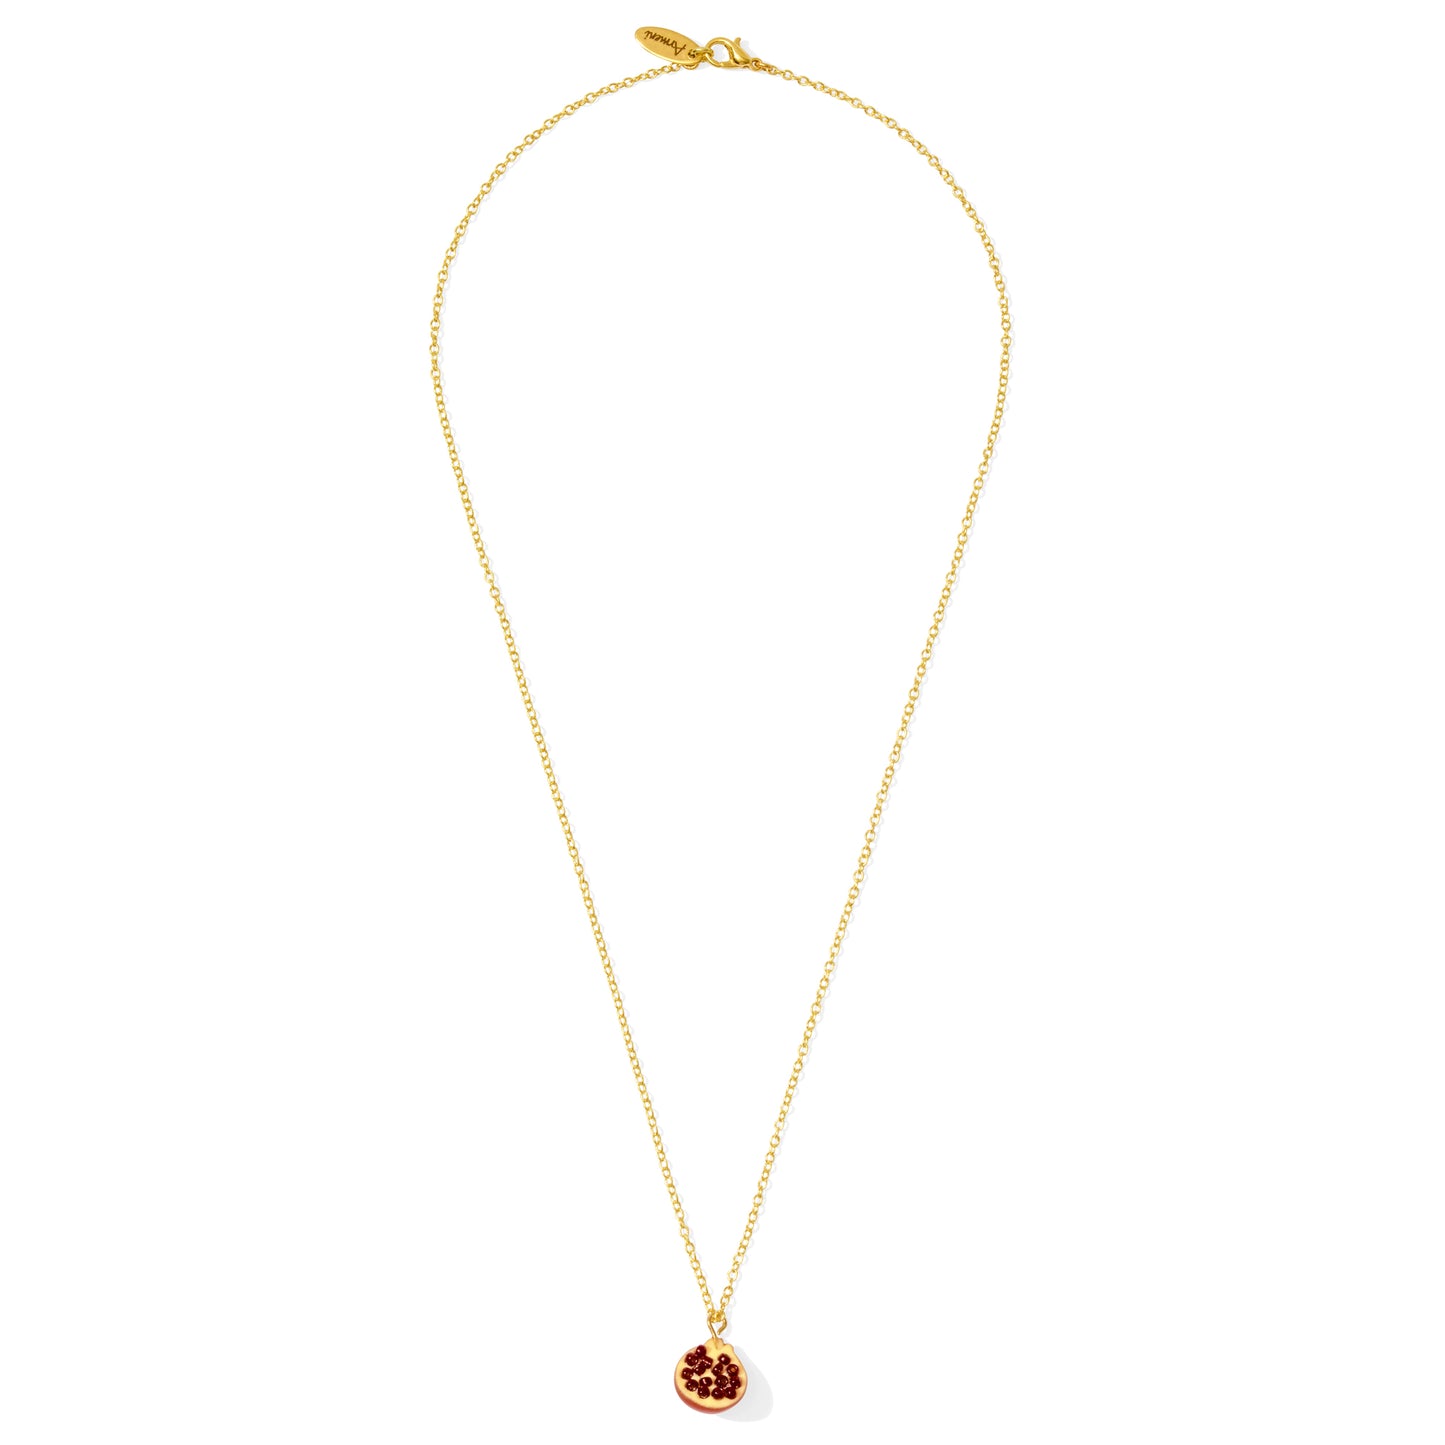 Mini Pomegranate Noor Crystal Necklace - Lusanet Collective